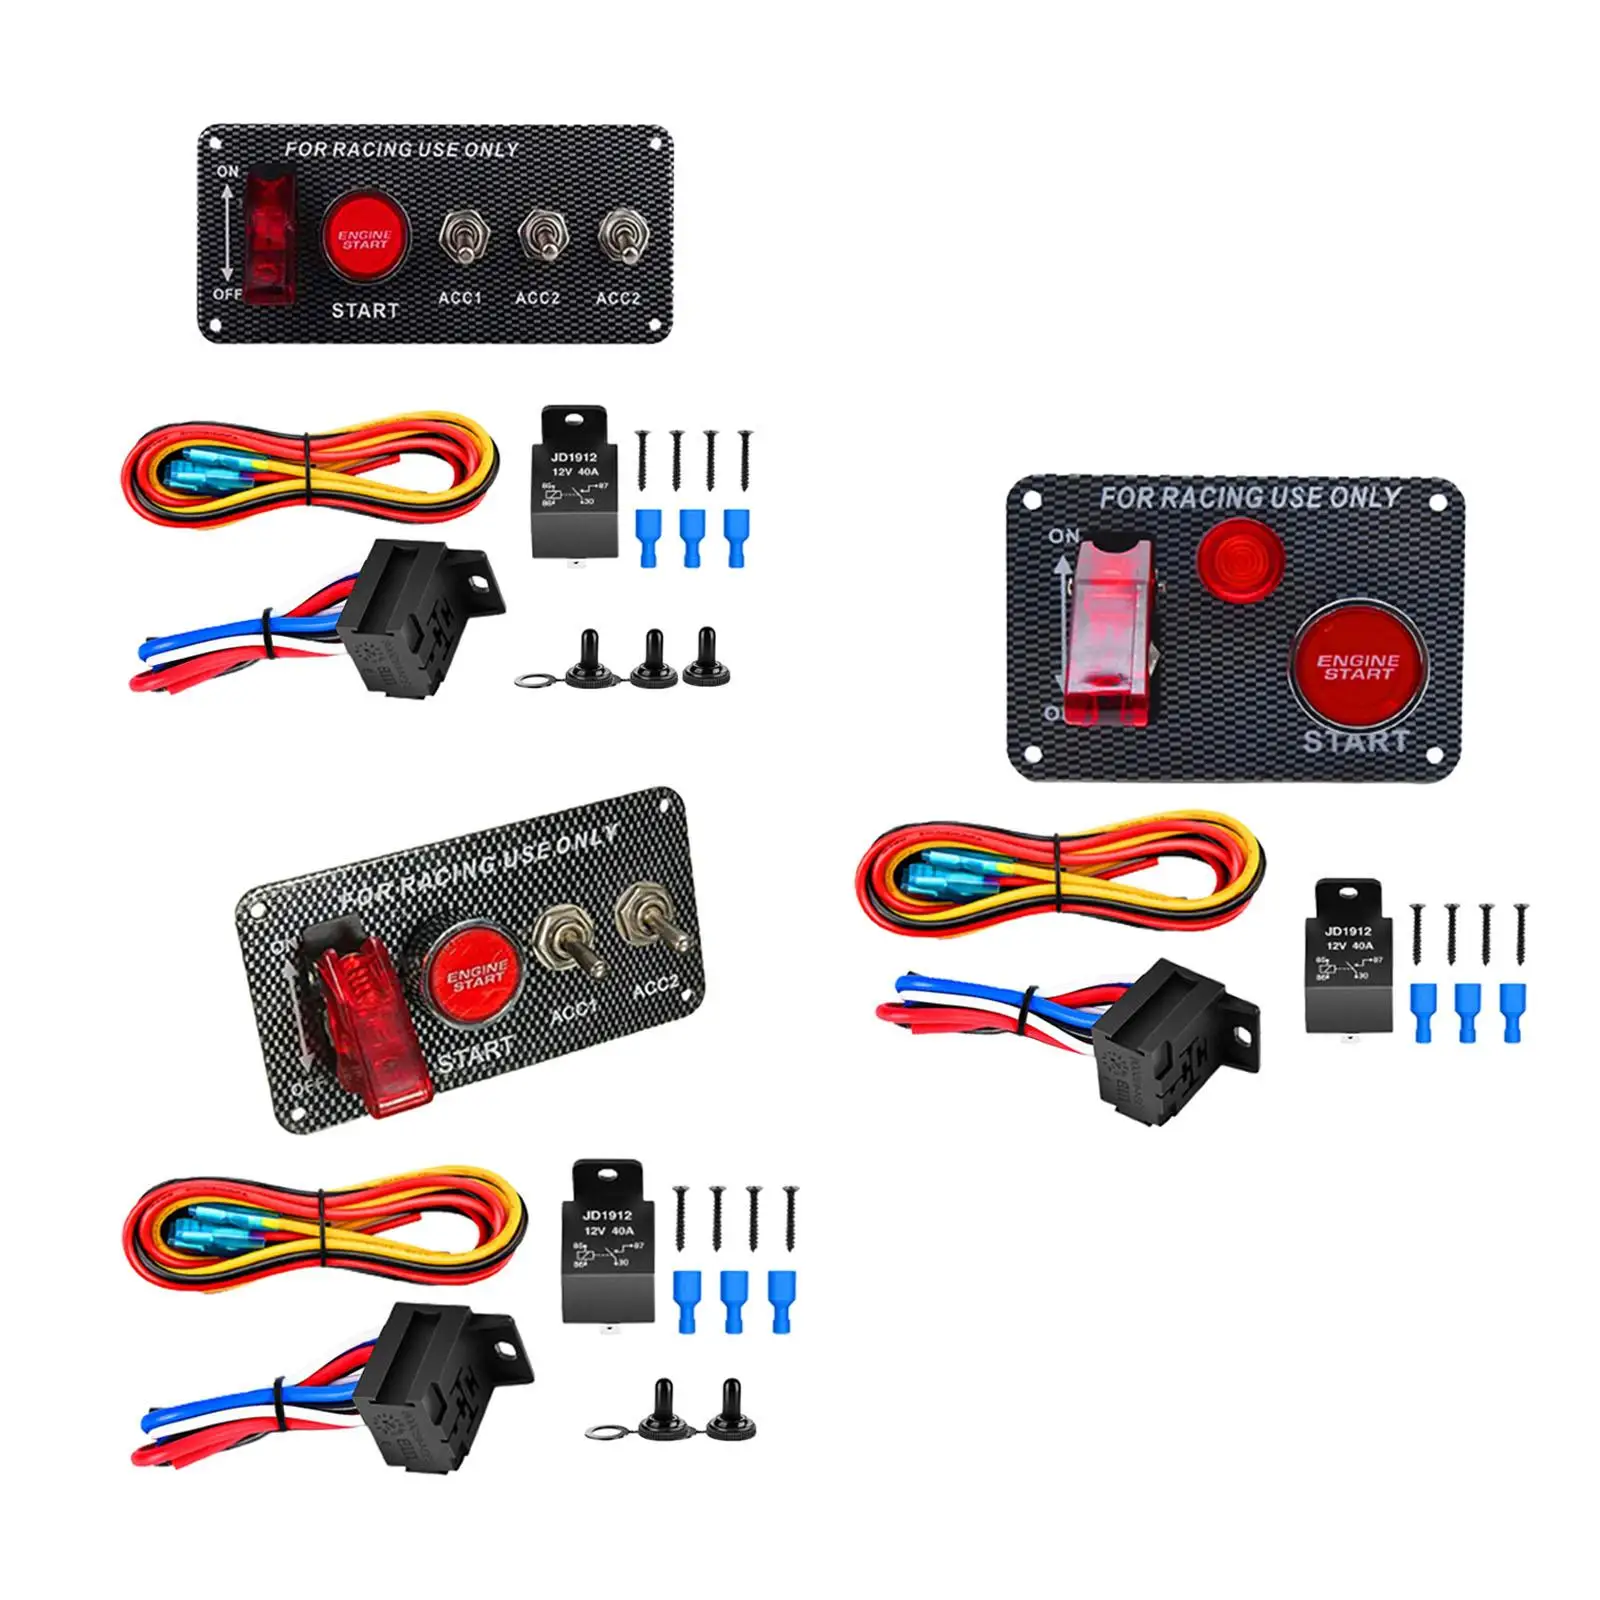 12V Ignition Switch Panel Durable Engine Start Push Button Set for 12V Racing Vehicle Yachts Caravans Outboard Engine Boats